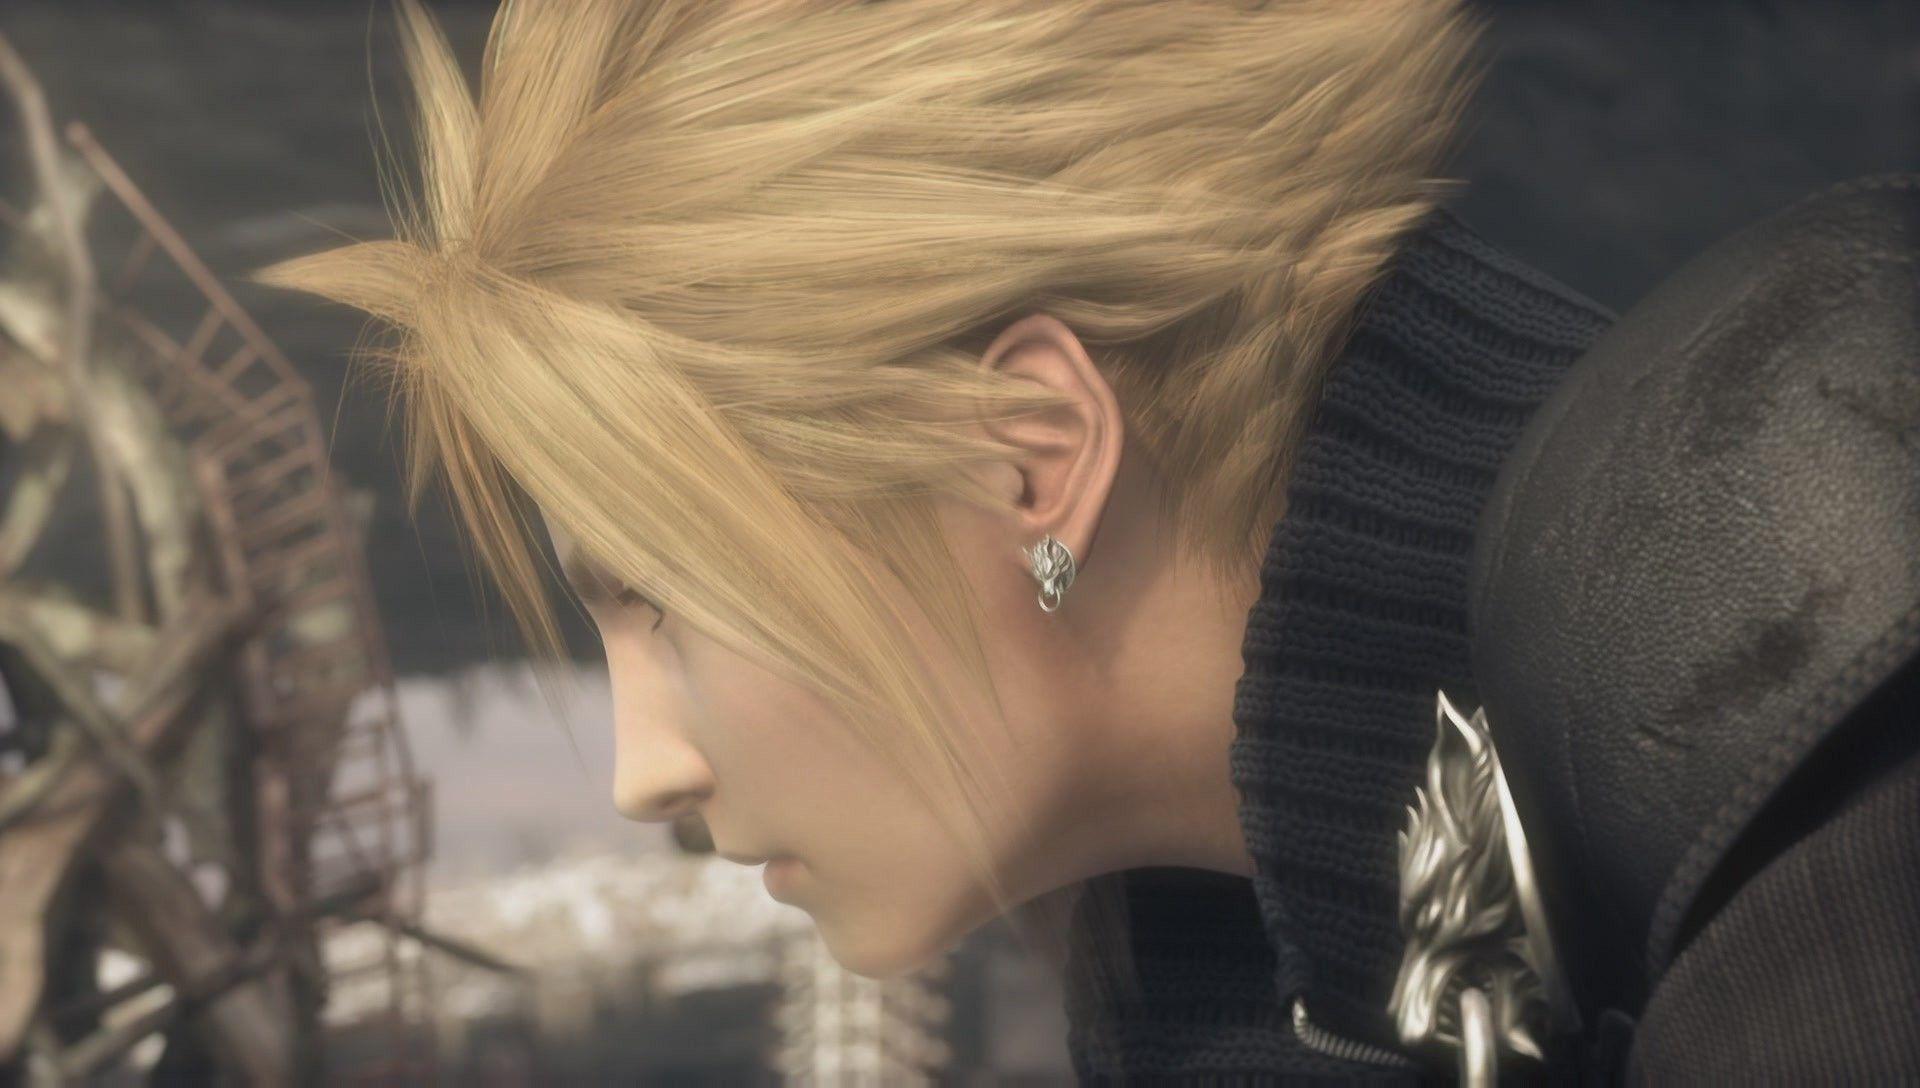 Final Fantasy VII: Advent Children Full HD Wallpapers and Backgrounds.